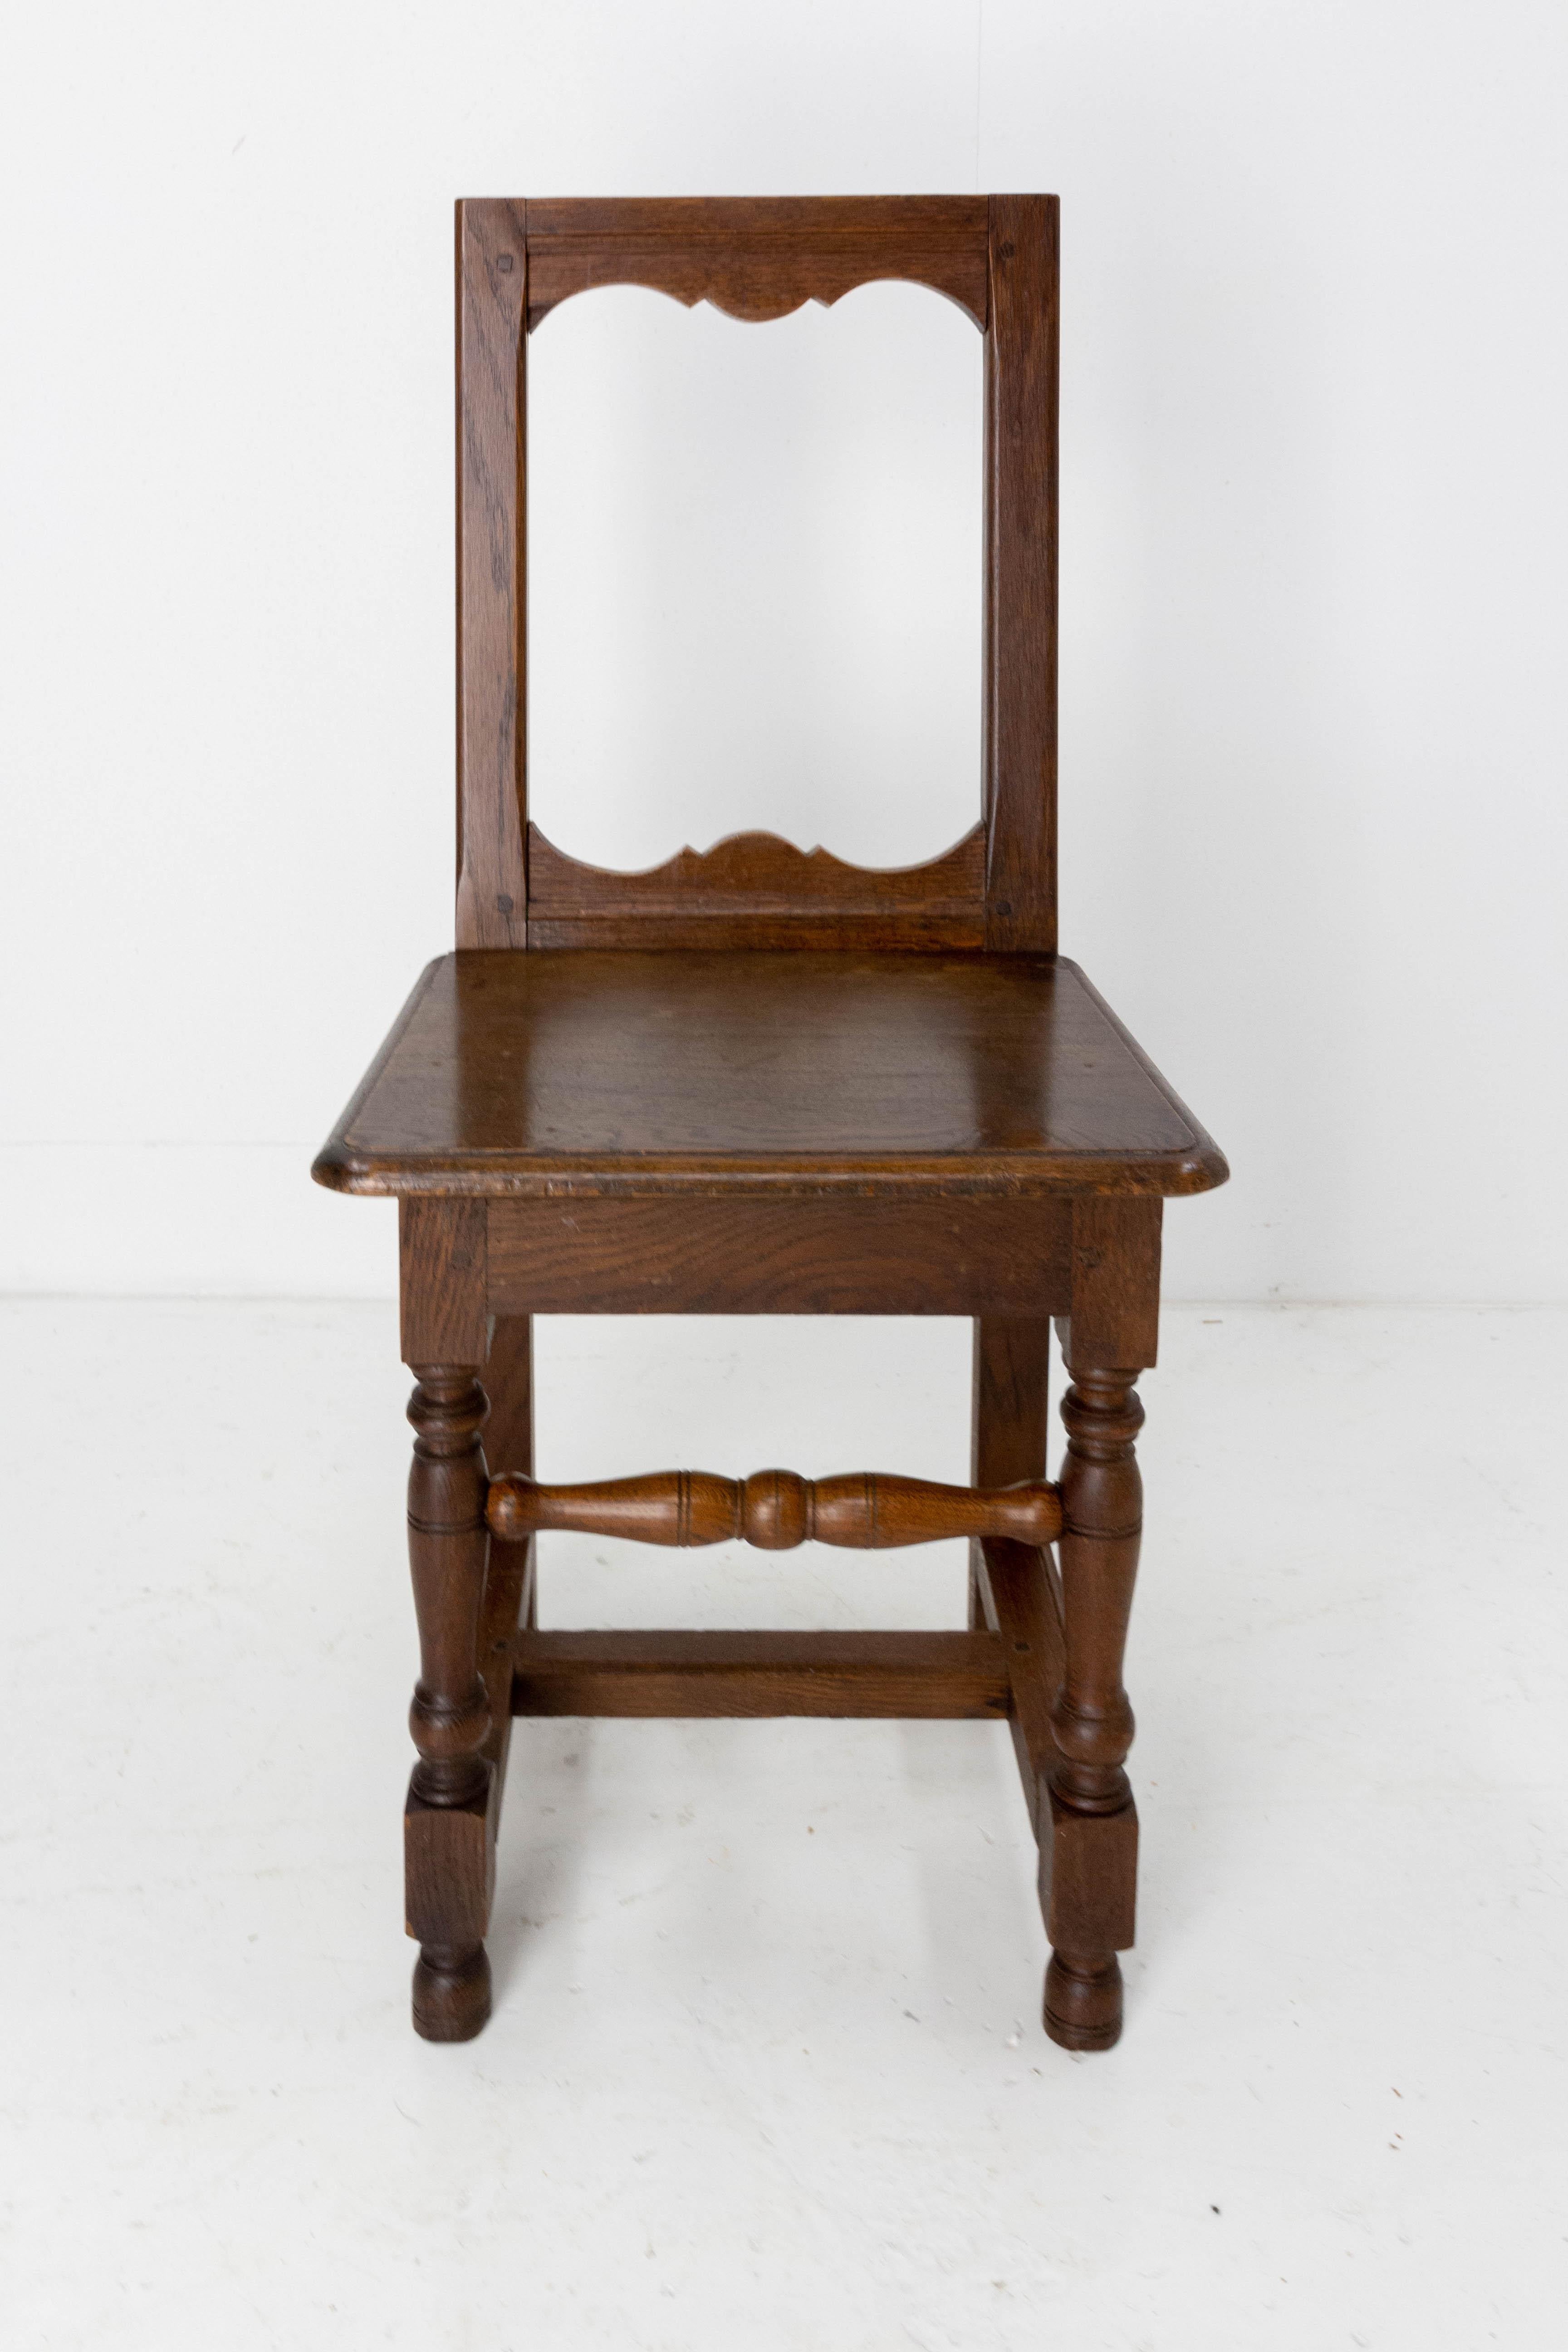 Oak Lorraine or Forêt Noire side chair
French, midcentury circa 1940
Charactereful
Good condition

shipping:
P 38 /L 39 / H 84 cm 5 kg.
 